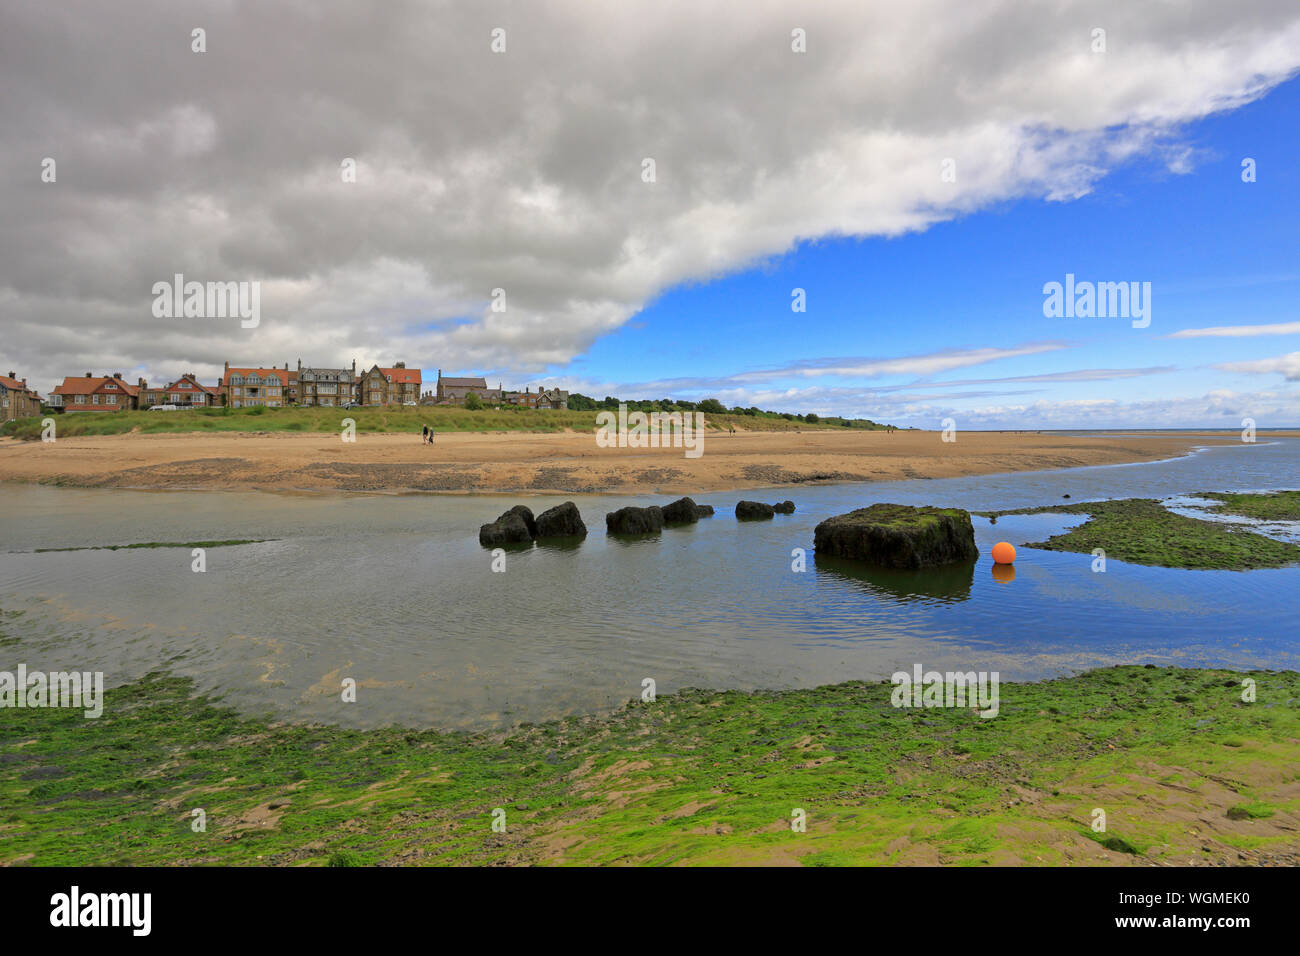 Remains of Word War Two anti-tank blocks at low tide, Alnmouth, Northumberland, England, UK. Stock Photo